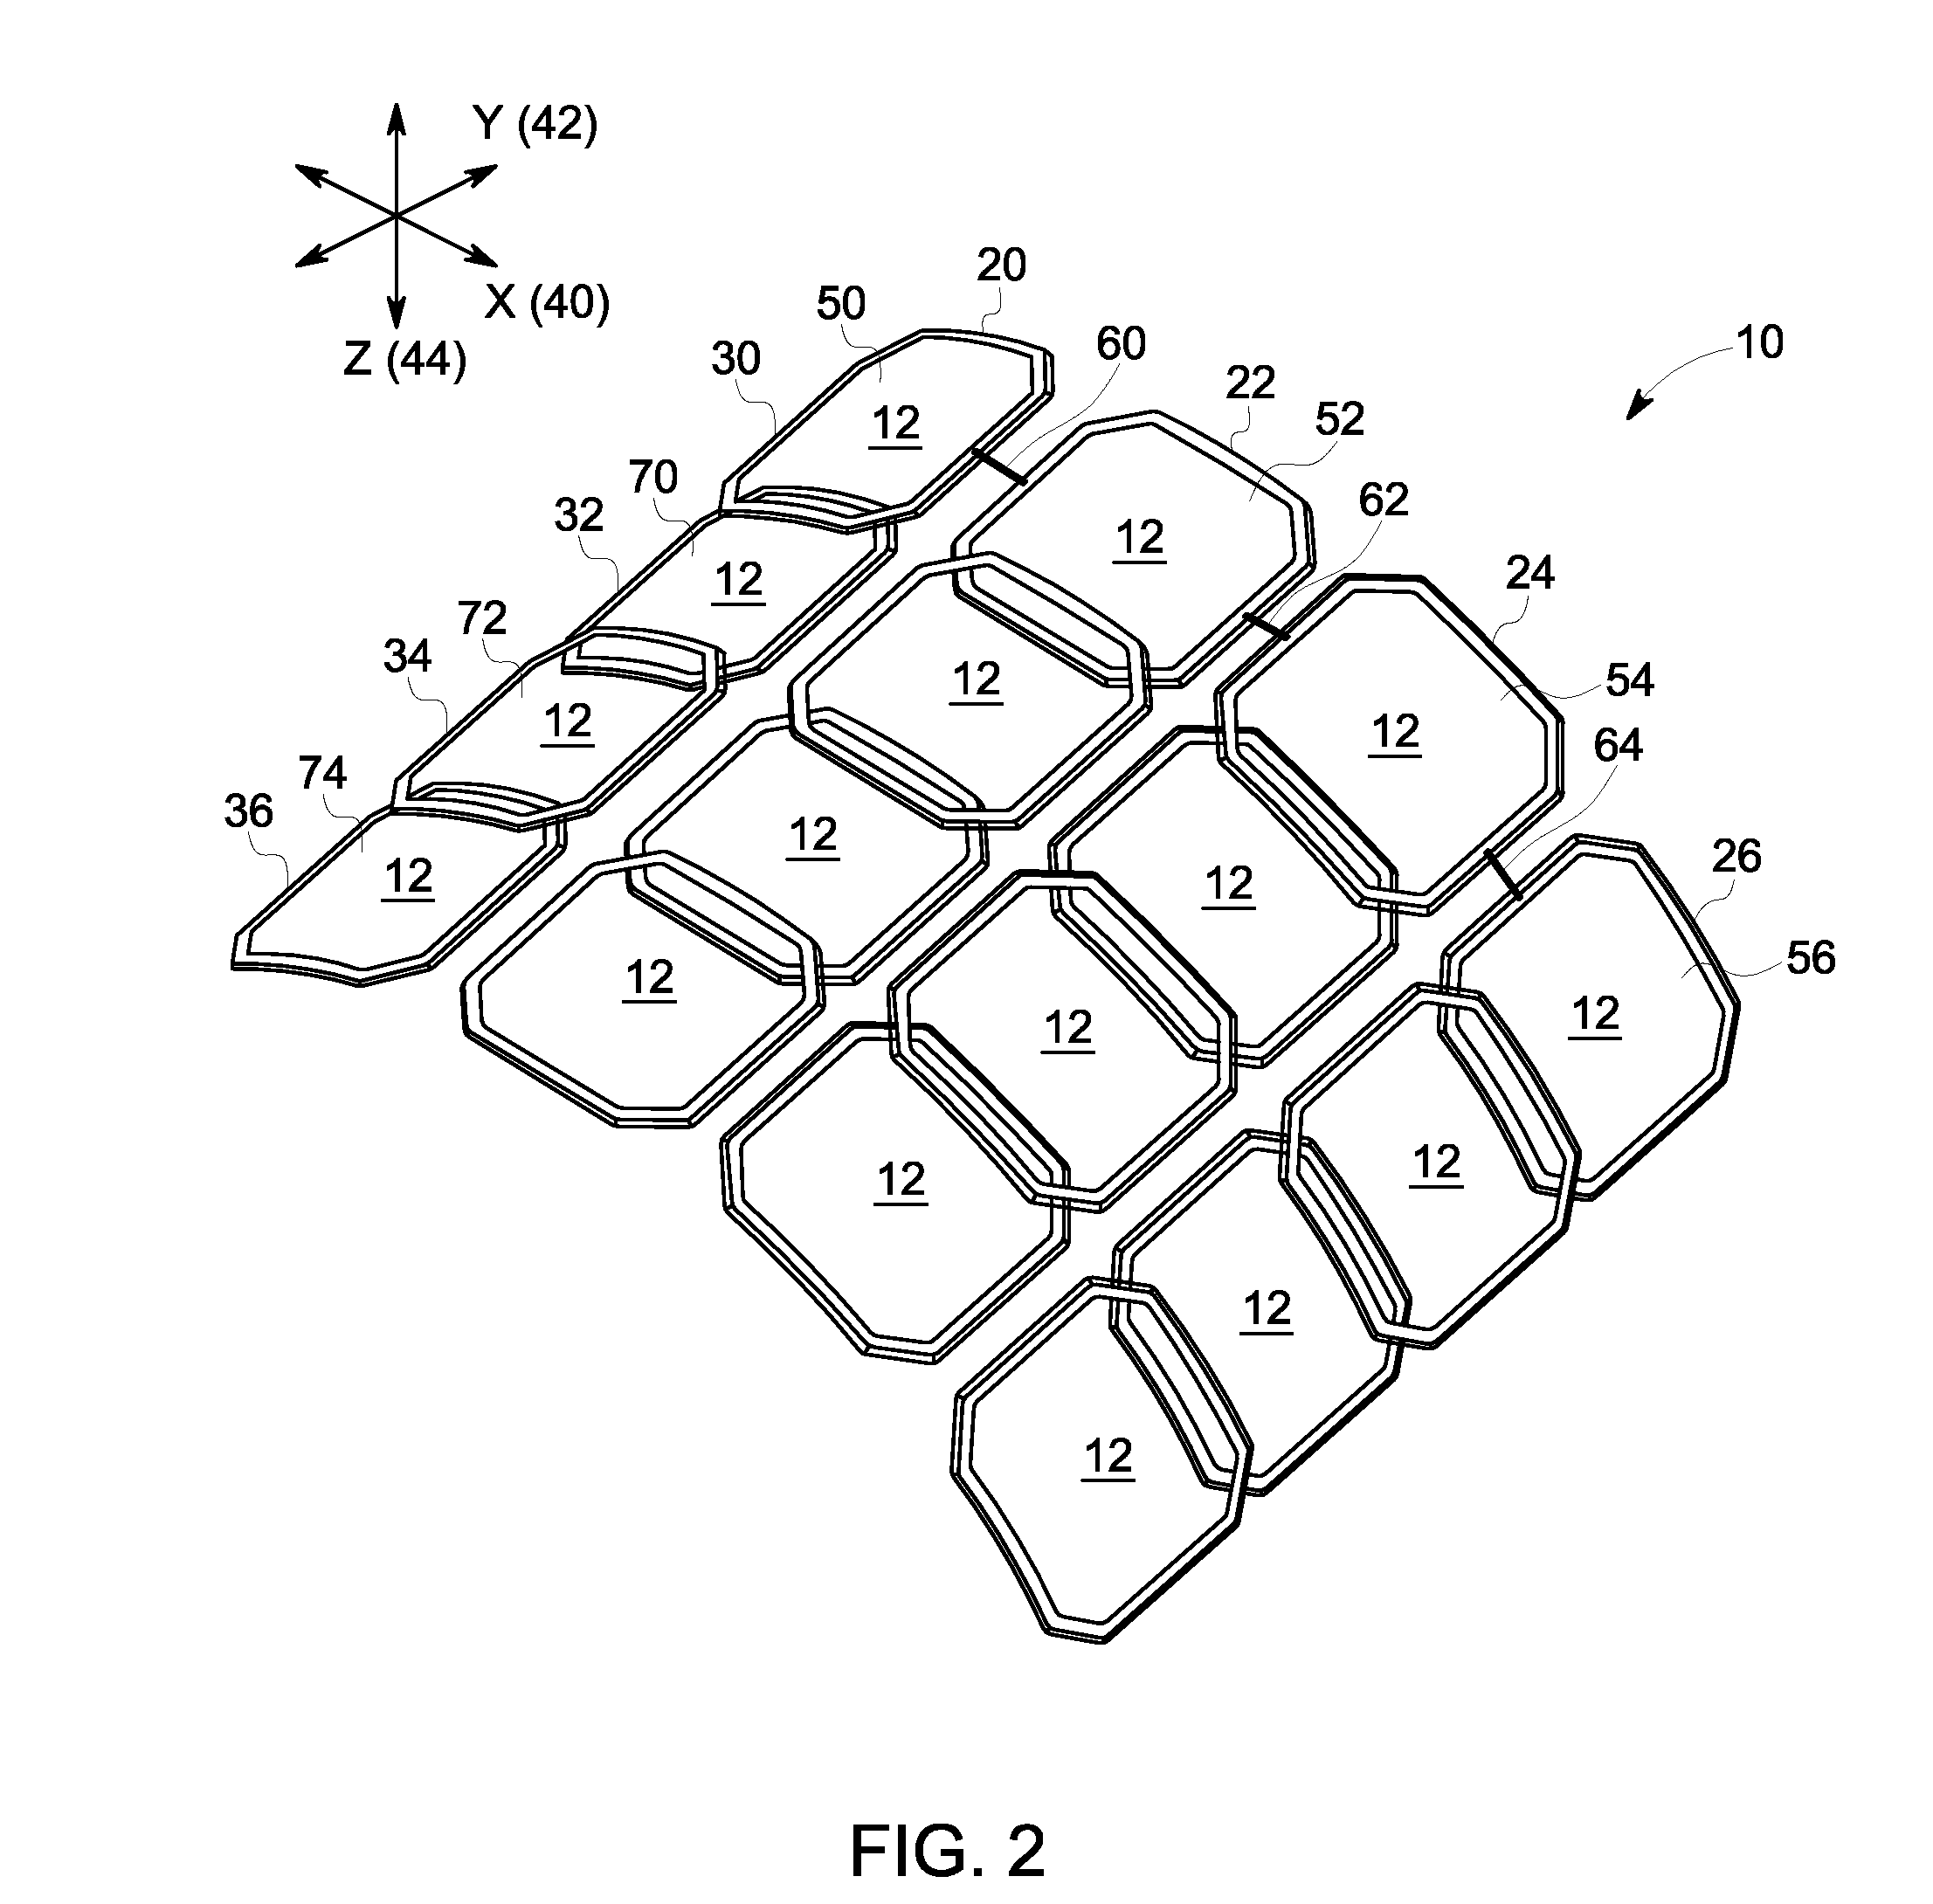 Radio frequency (RF) coil array for a magnetic resonance imaging system